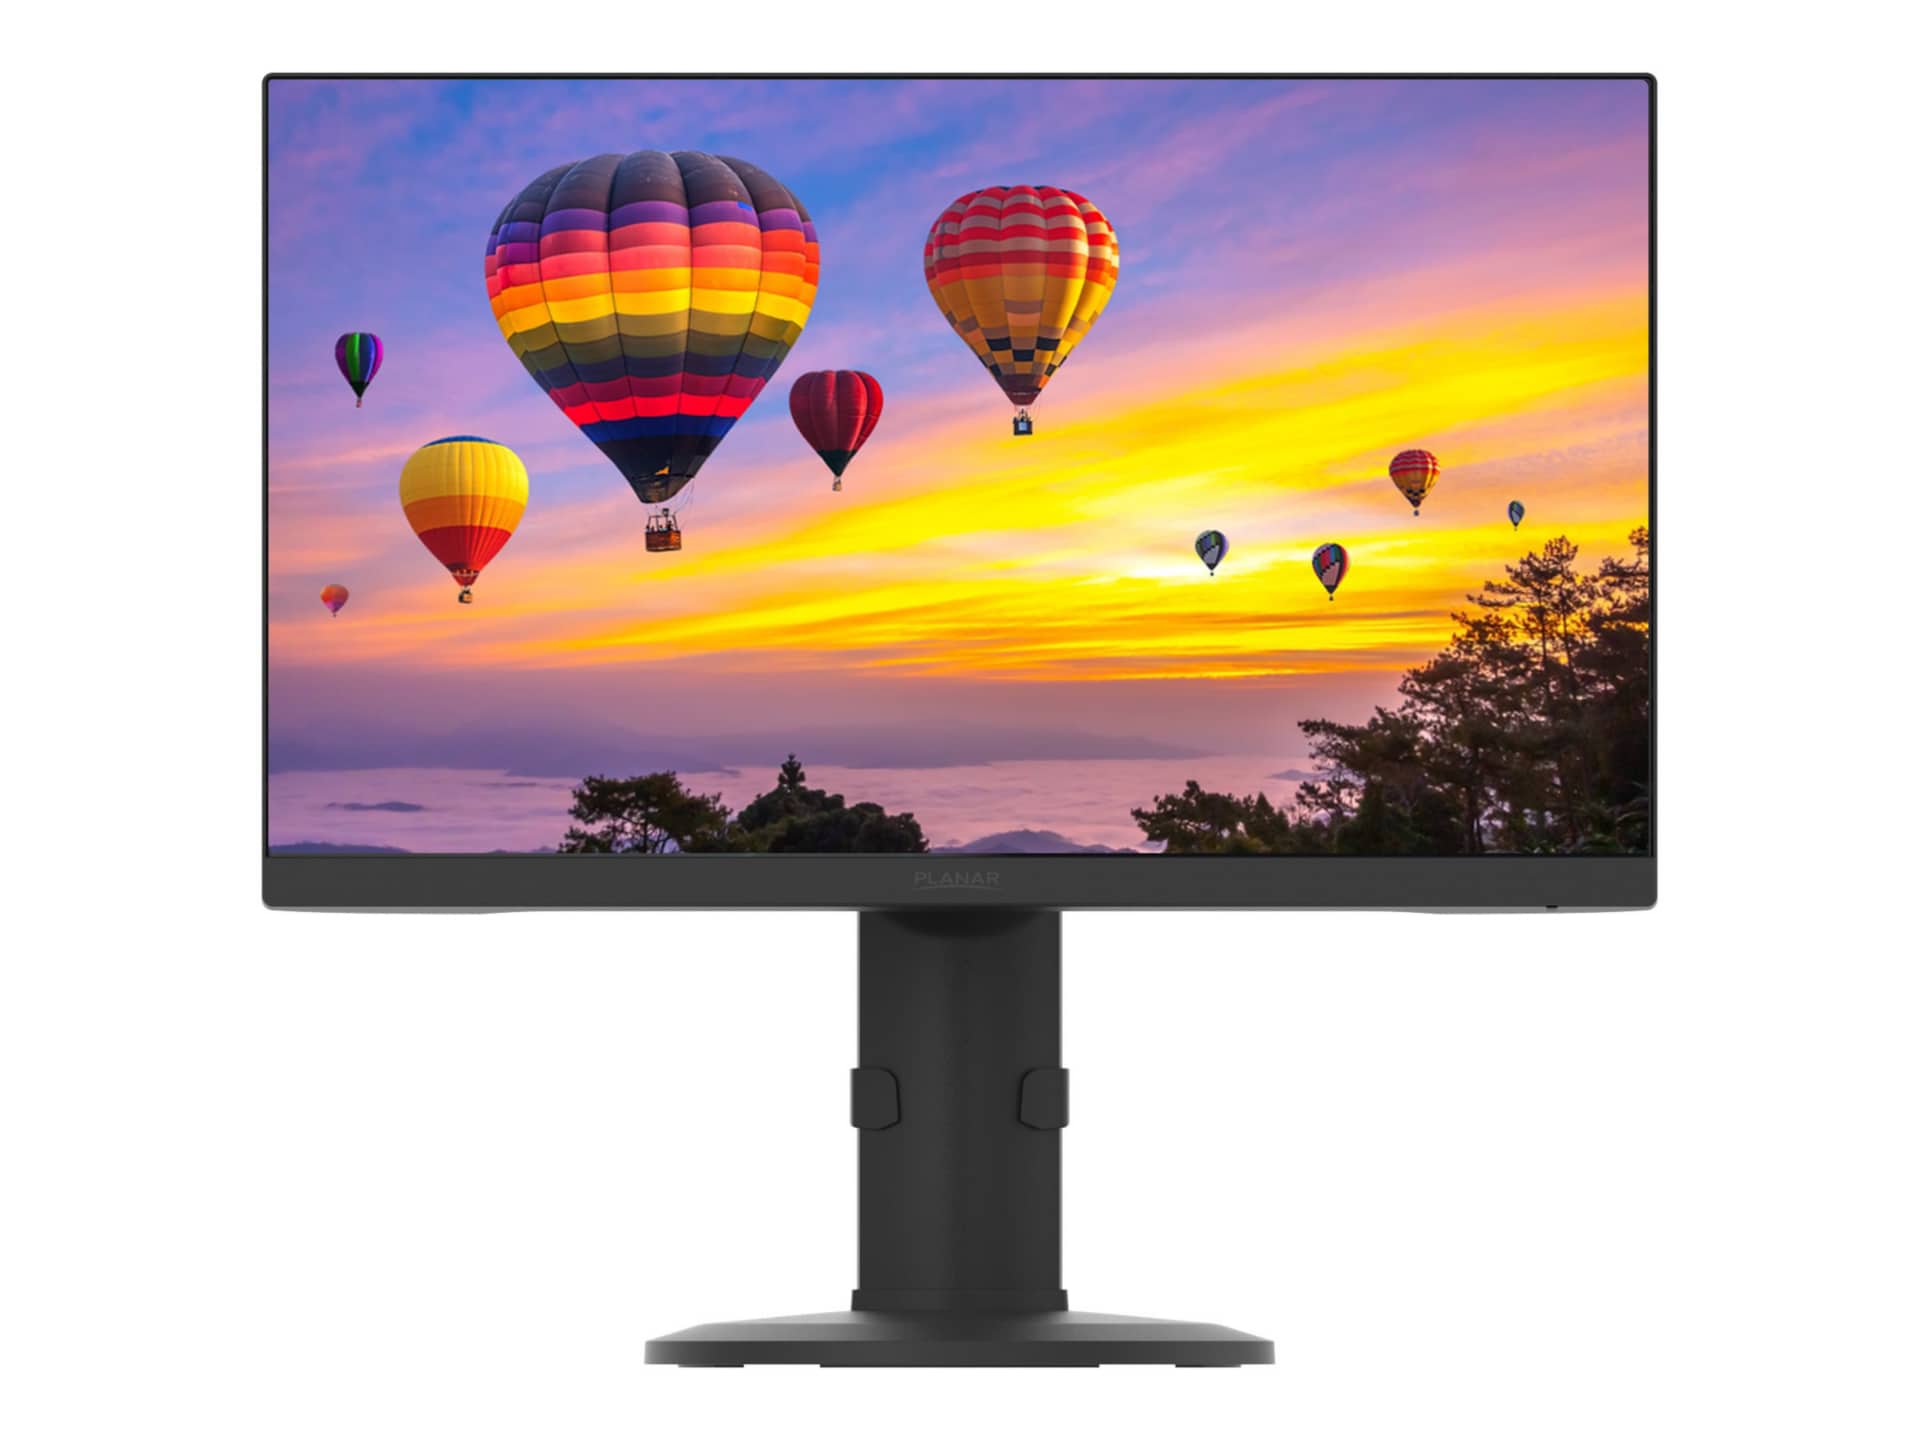 Planar PZN2410 - LCD monitor - Full HD (1080p) - 24" - with 3-Years Warrant